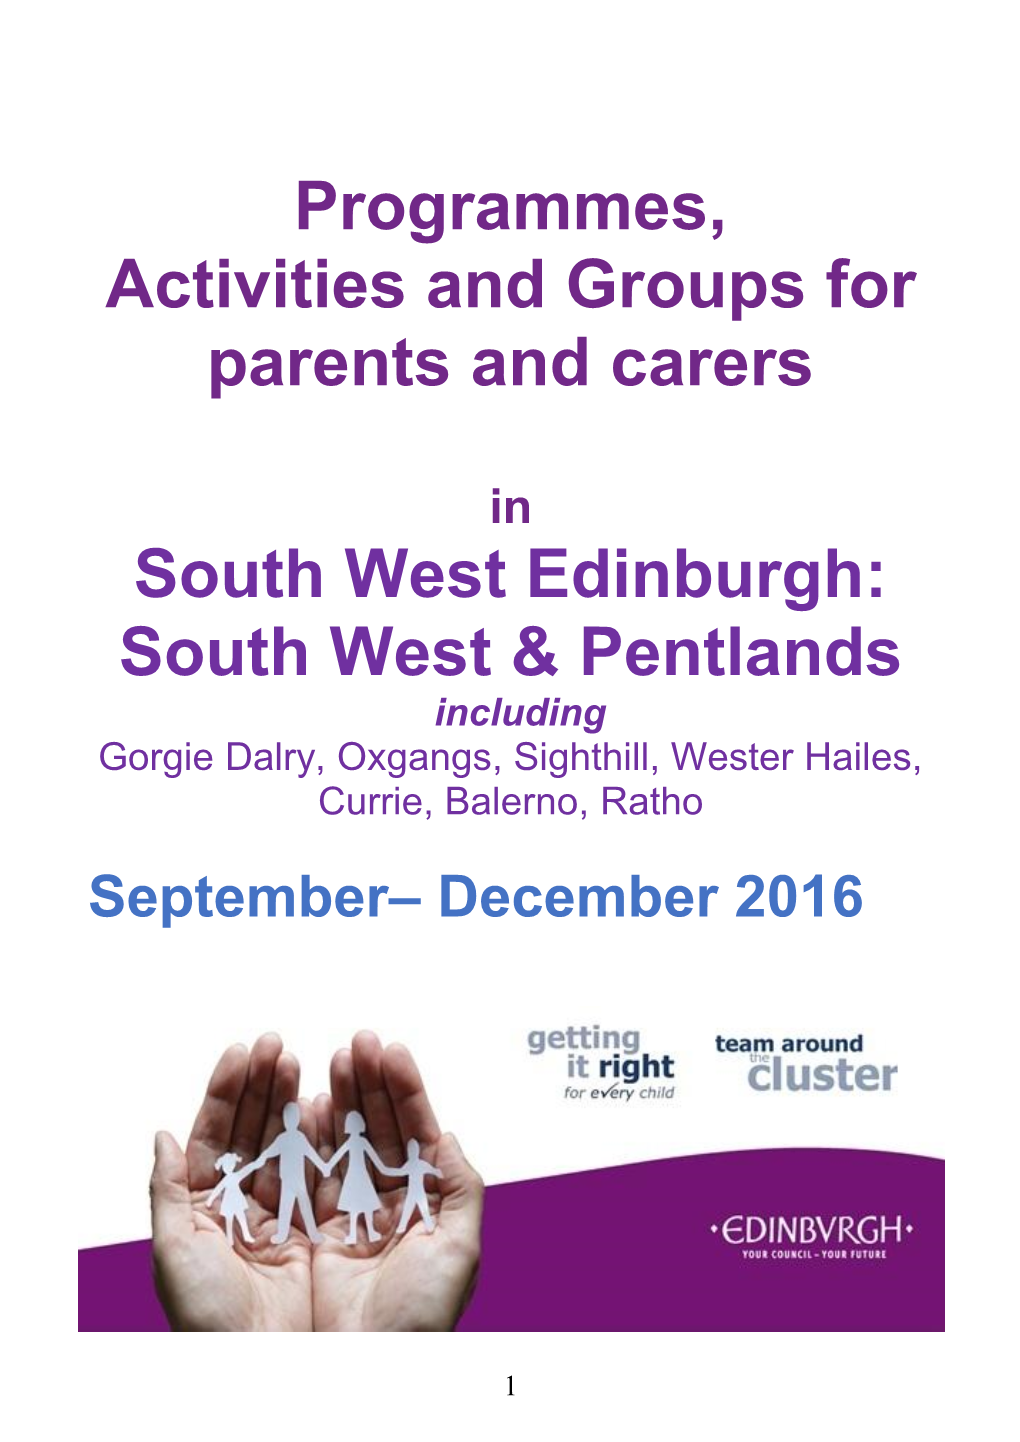 Groups & Programmes for Parents and Carers